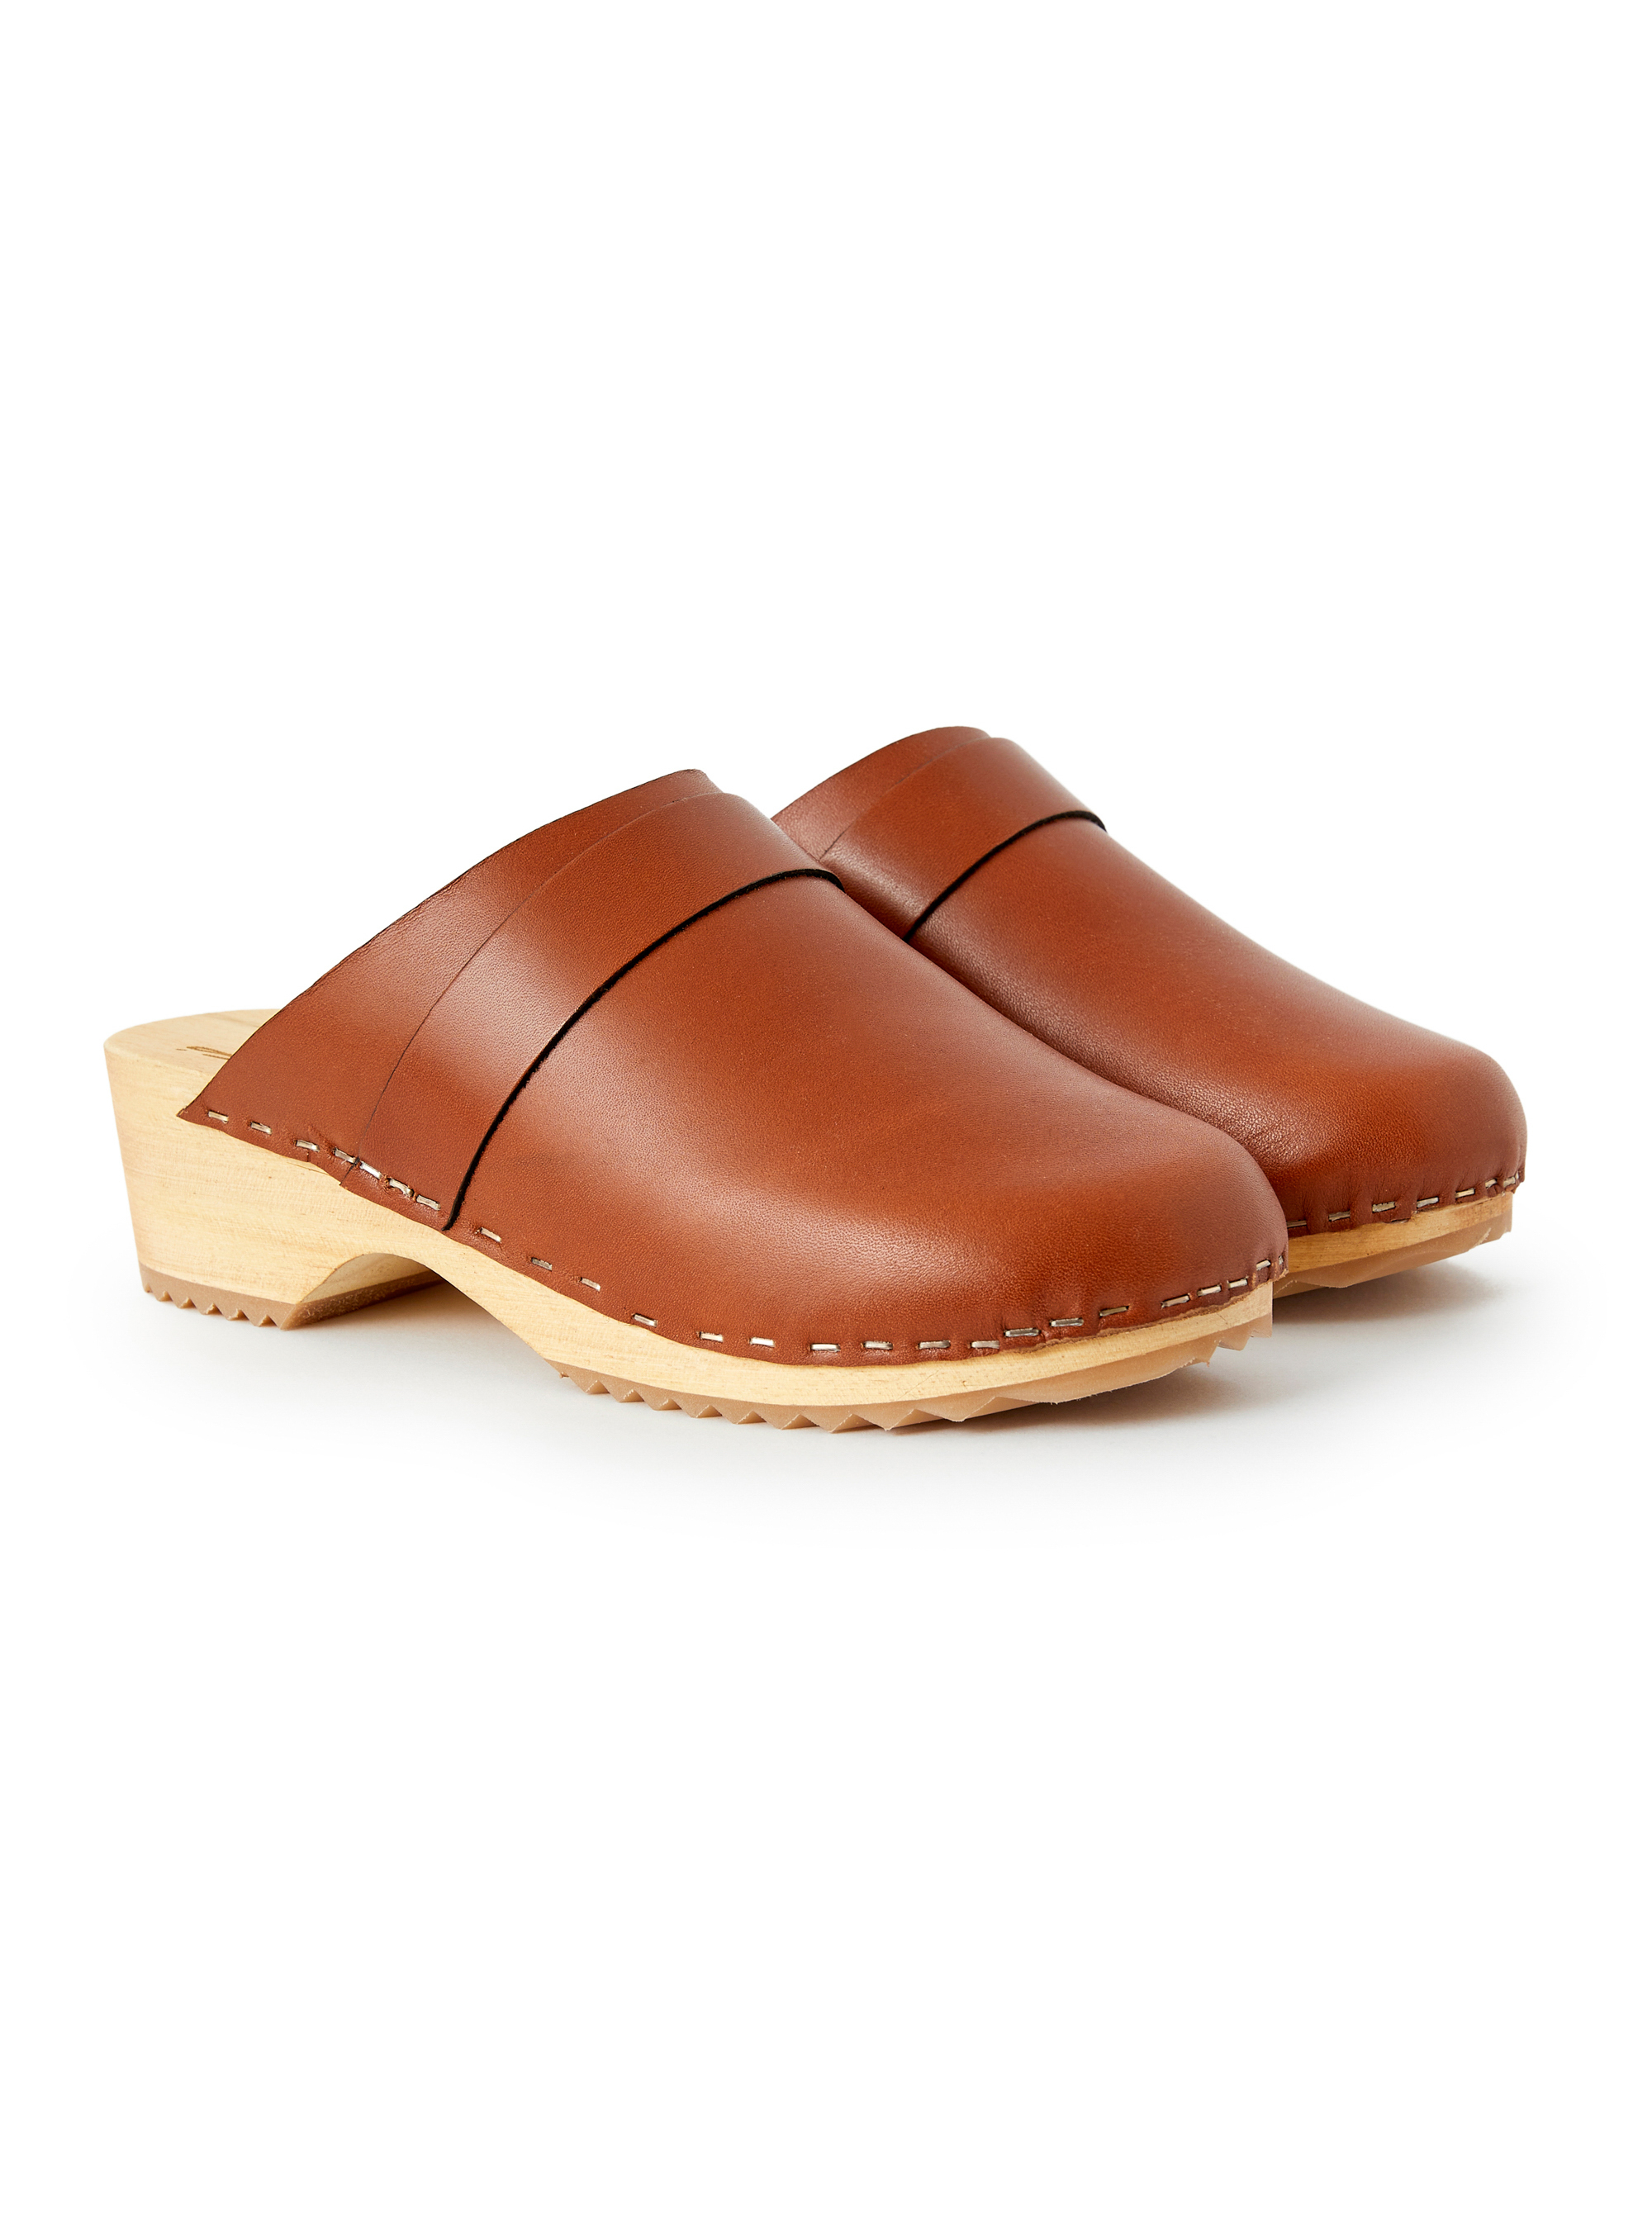 Brown leather clogs - Shoes - Il Gufo